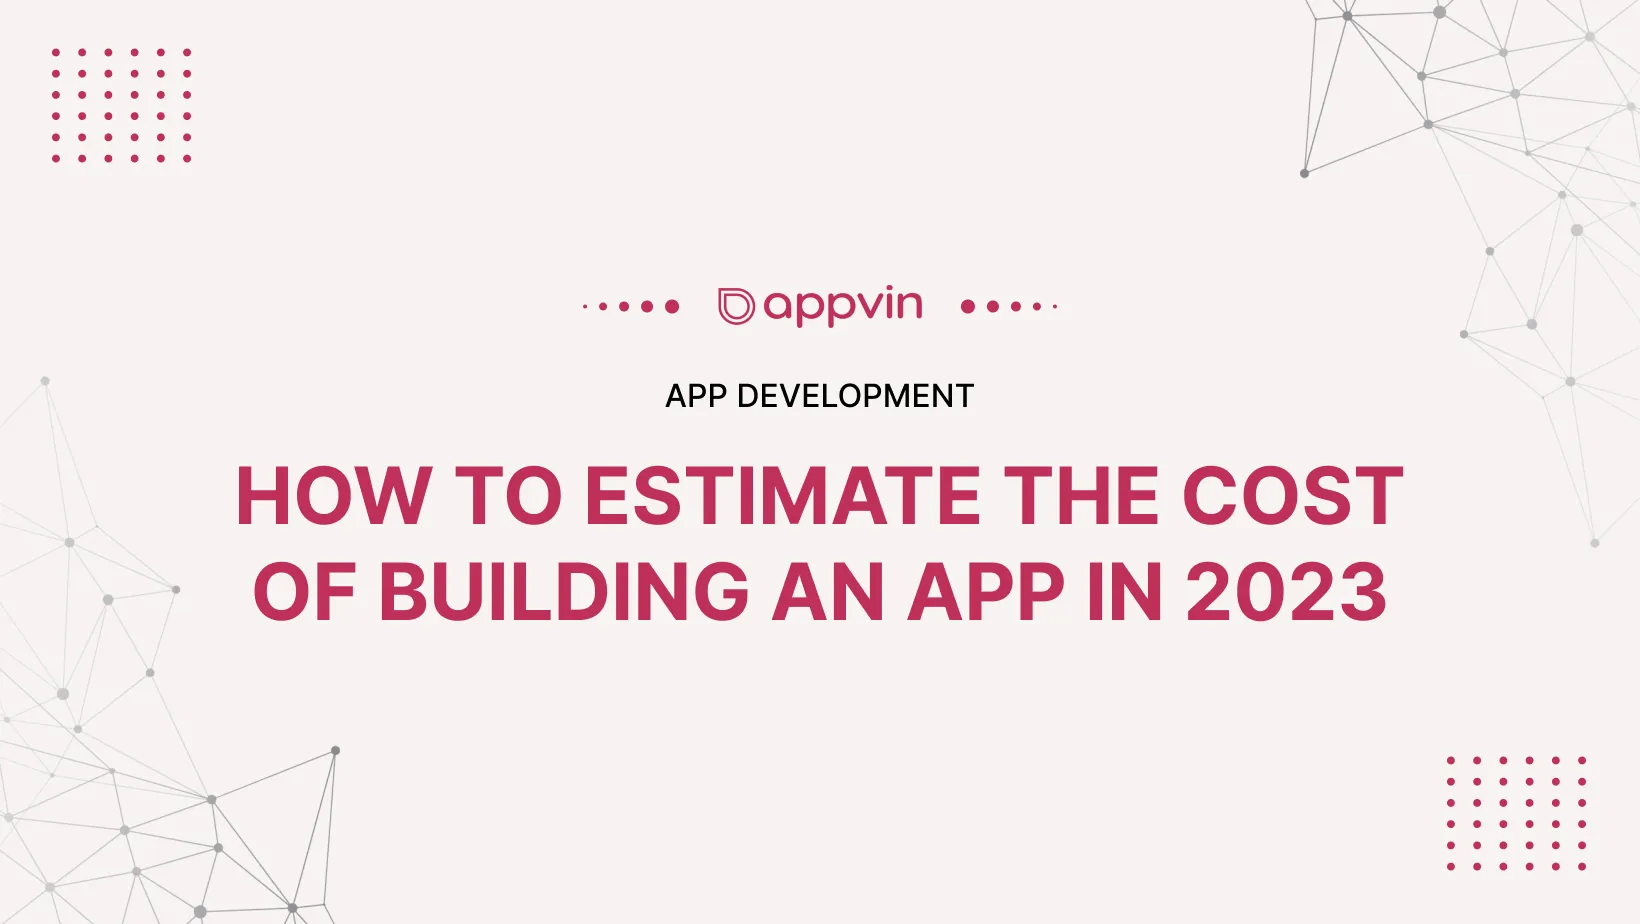 How to Estimate the Cost of Building an App in 2023 